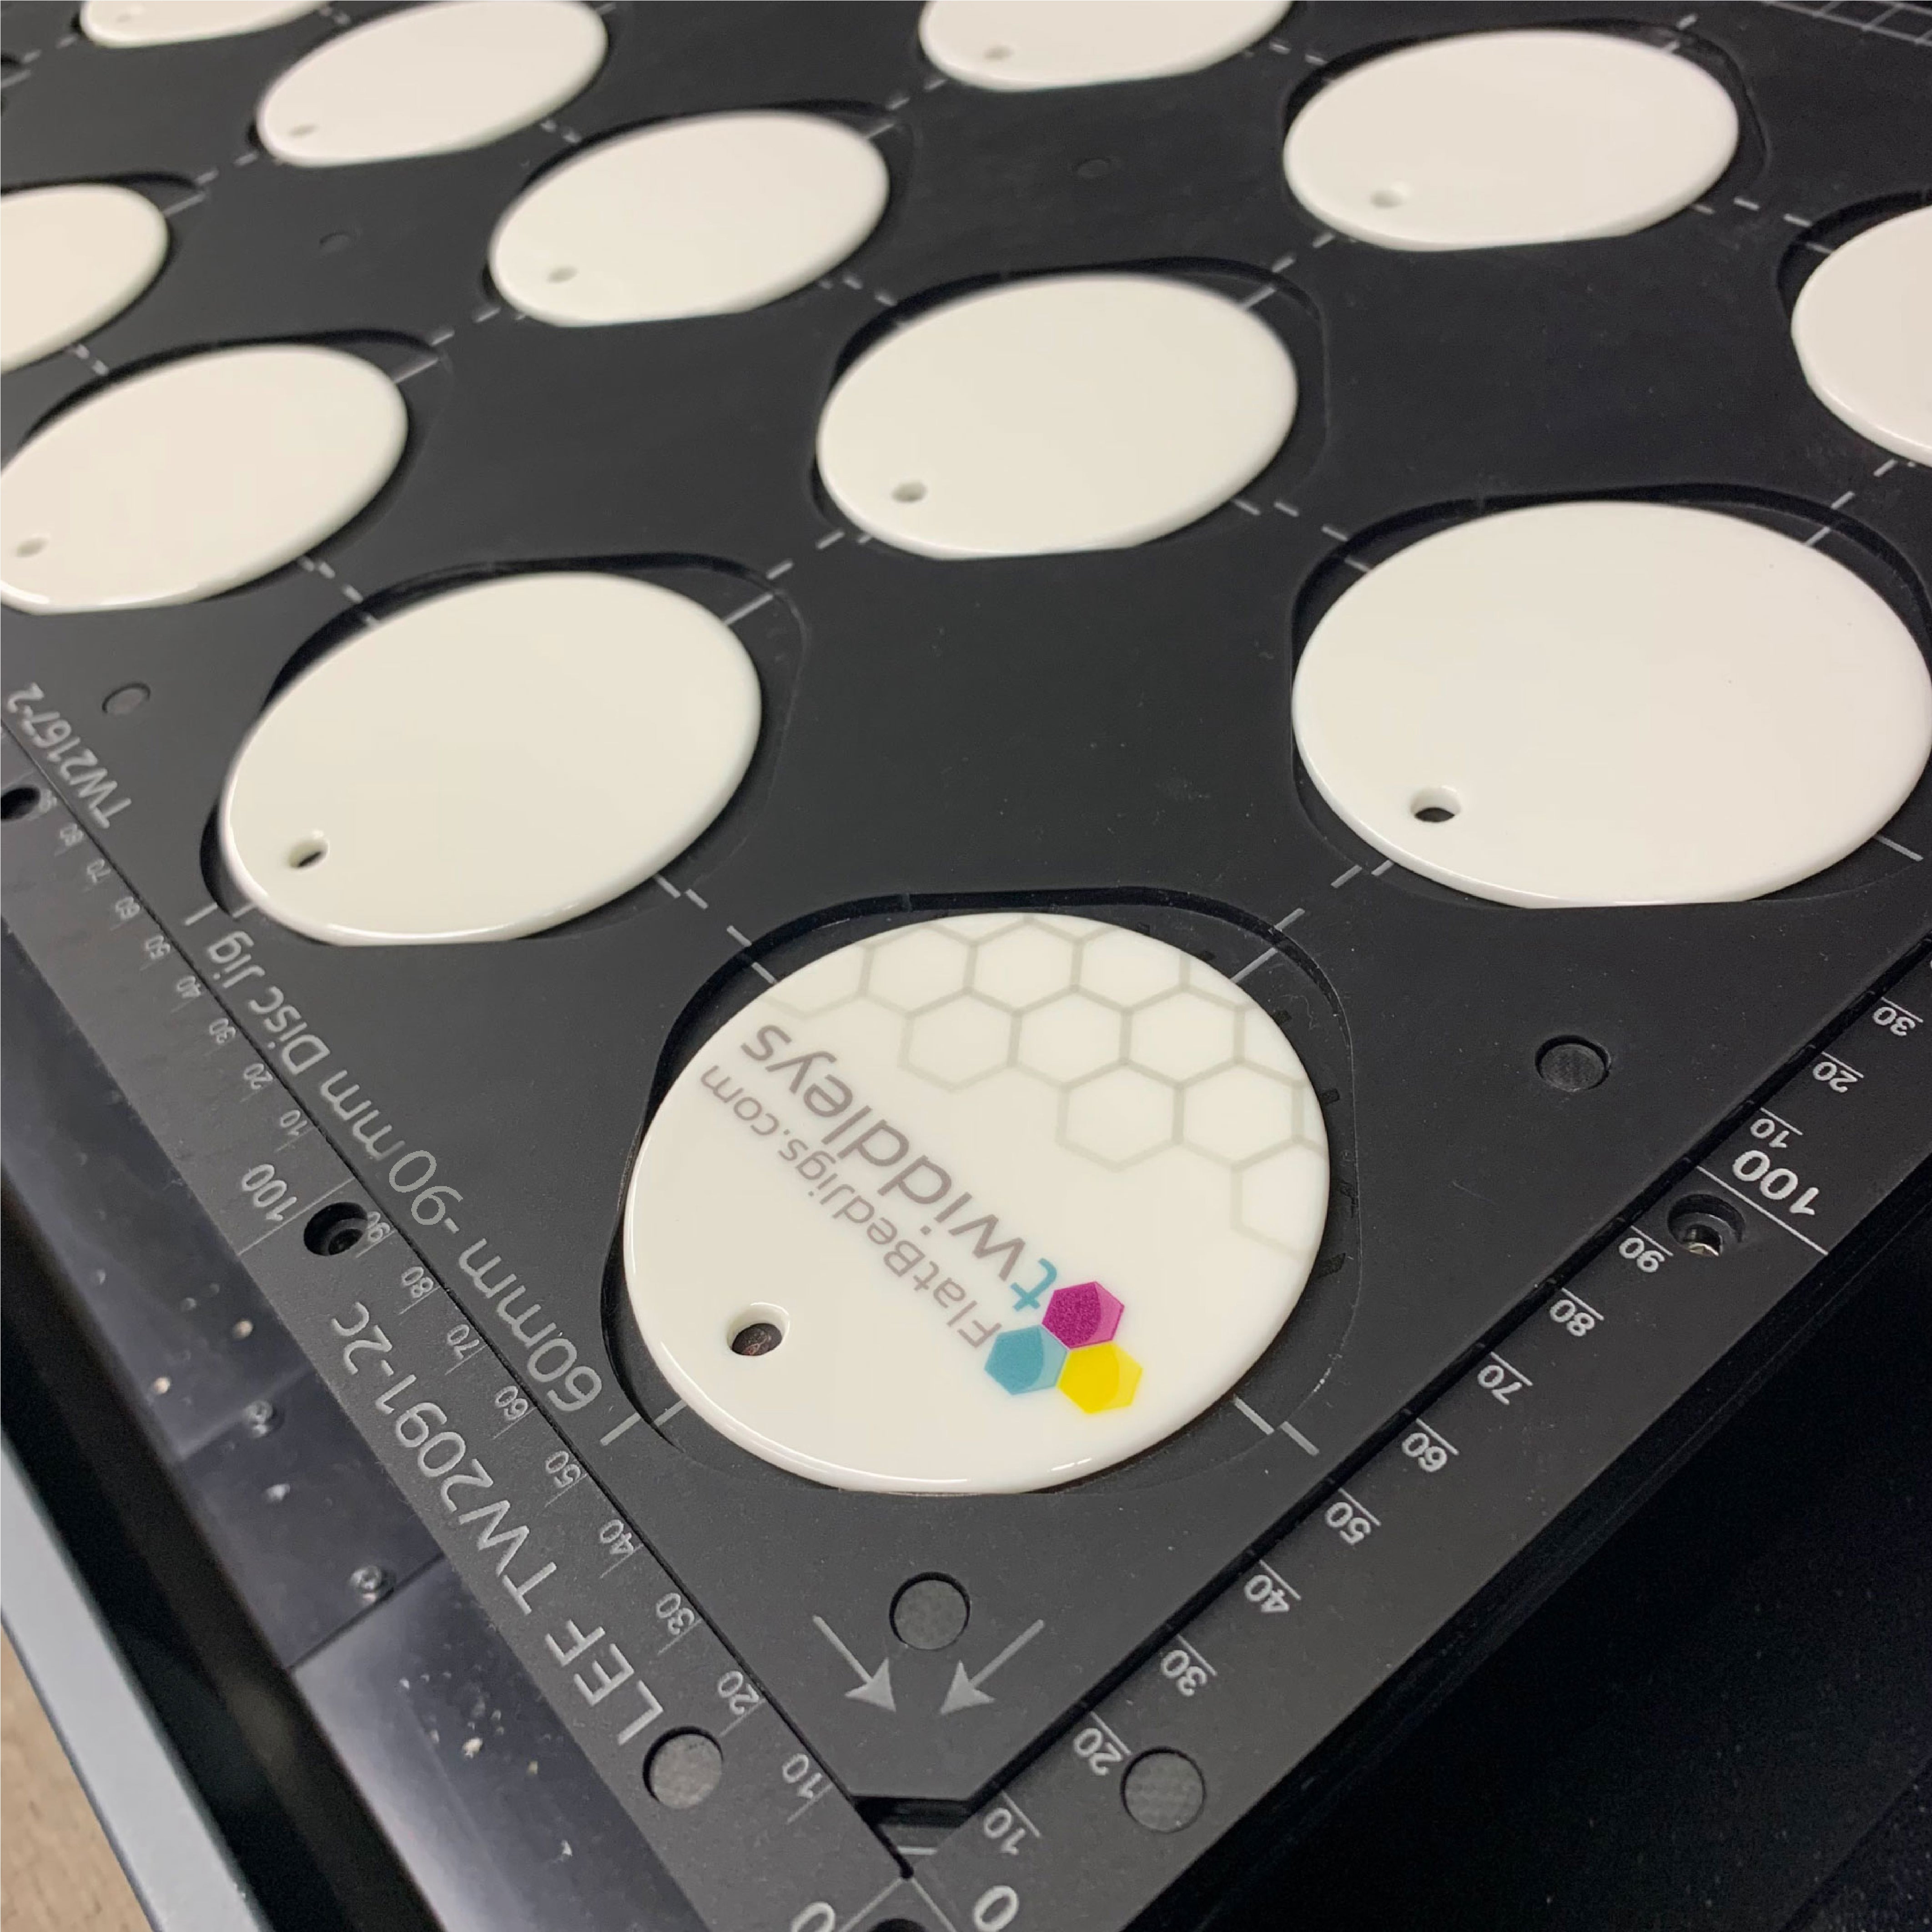 Ceramic Christmas Bauble Printing Jig for Mimaki UJF-3042 Flatbed Printer: 60mm - 90mm Circular Discs (6 Spaces)